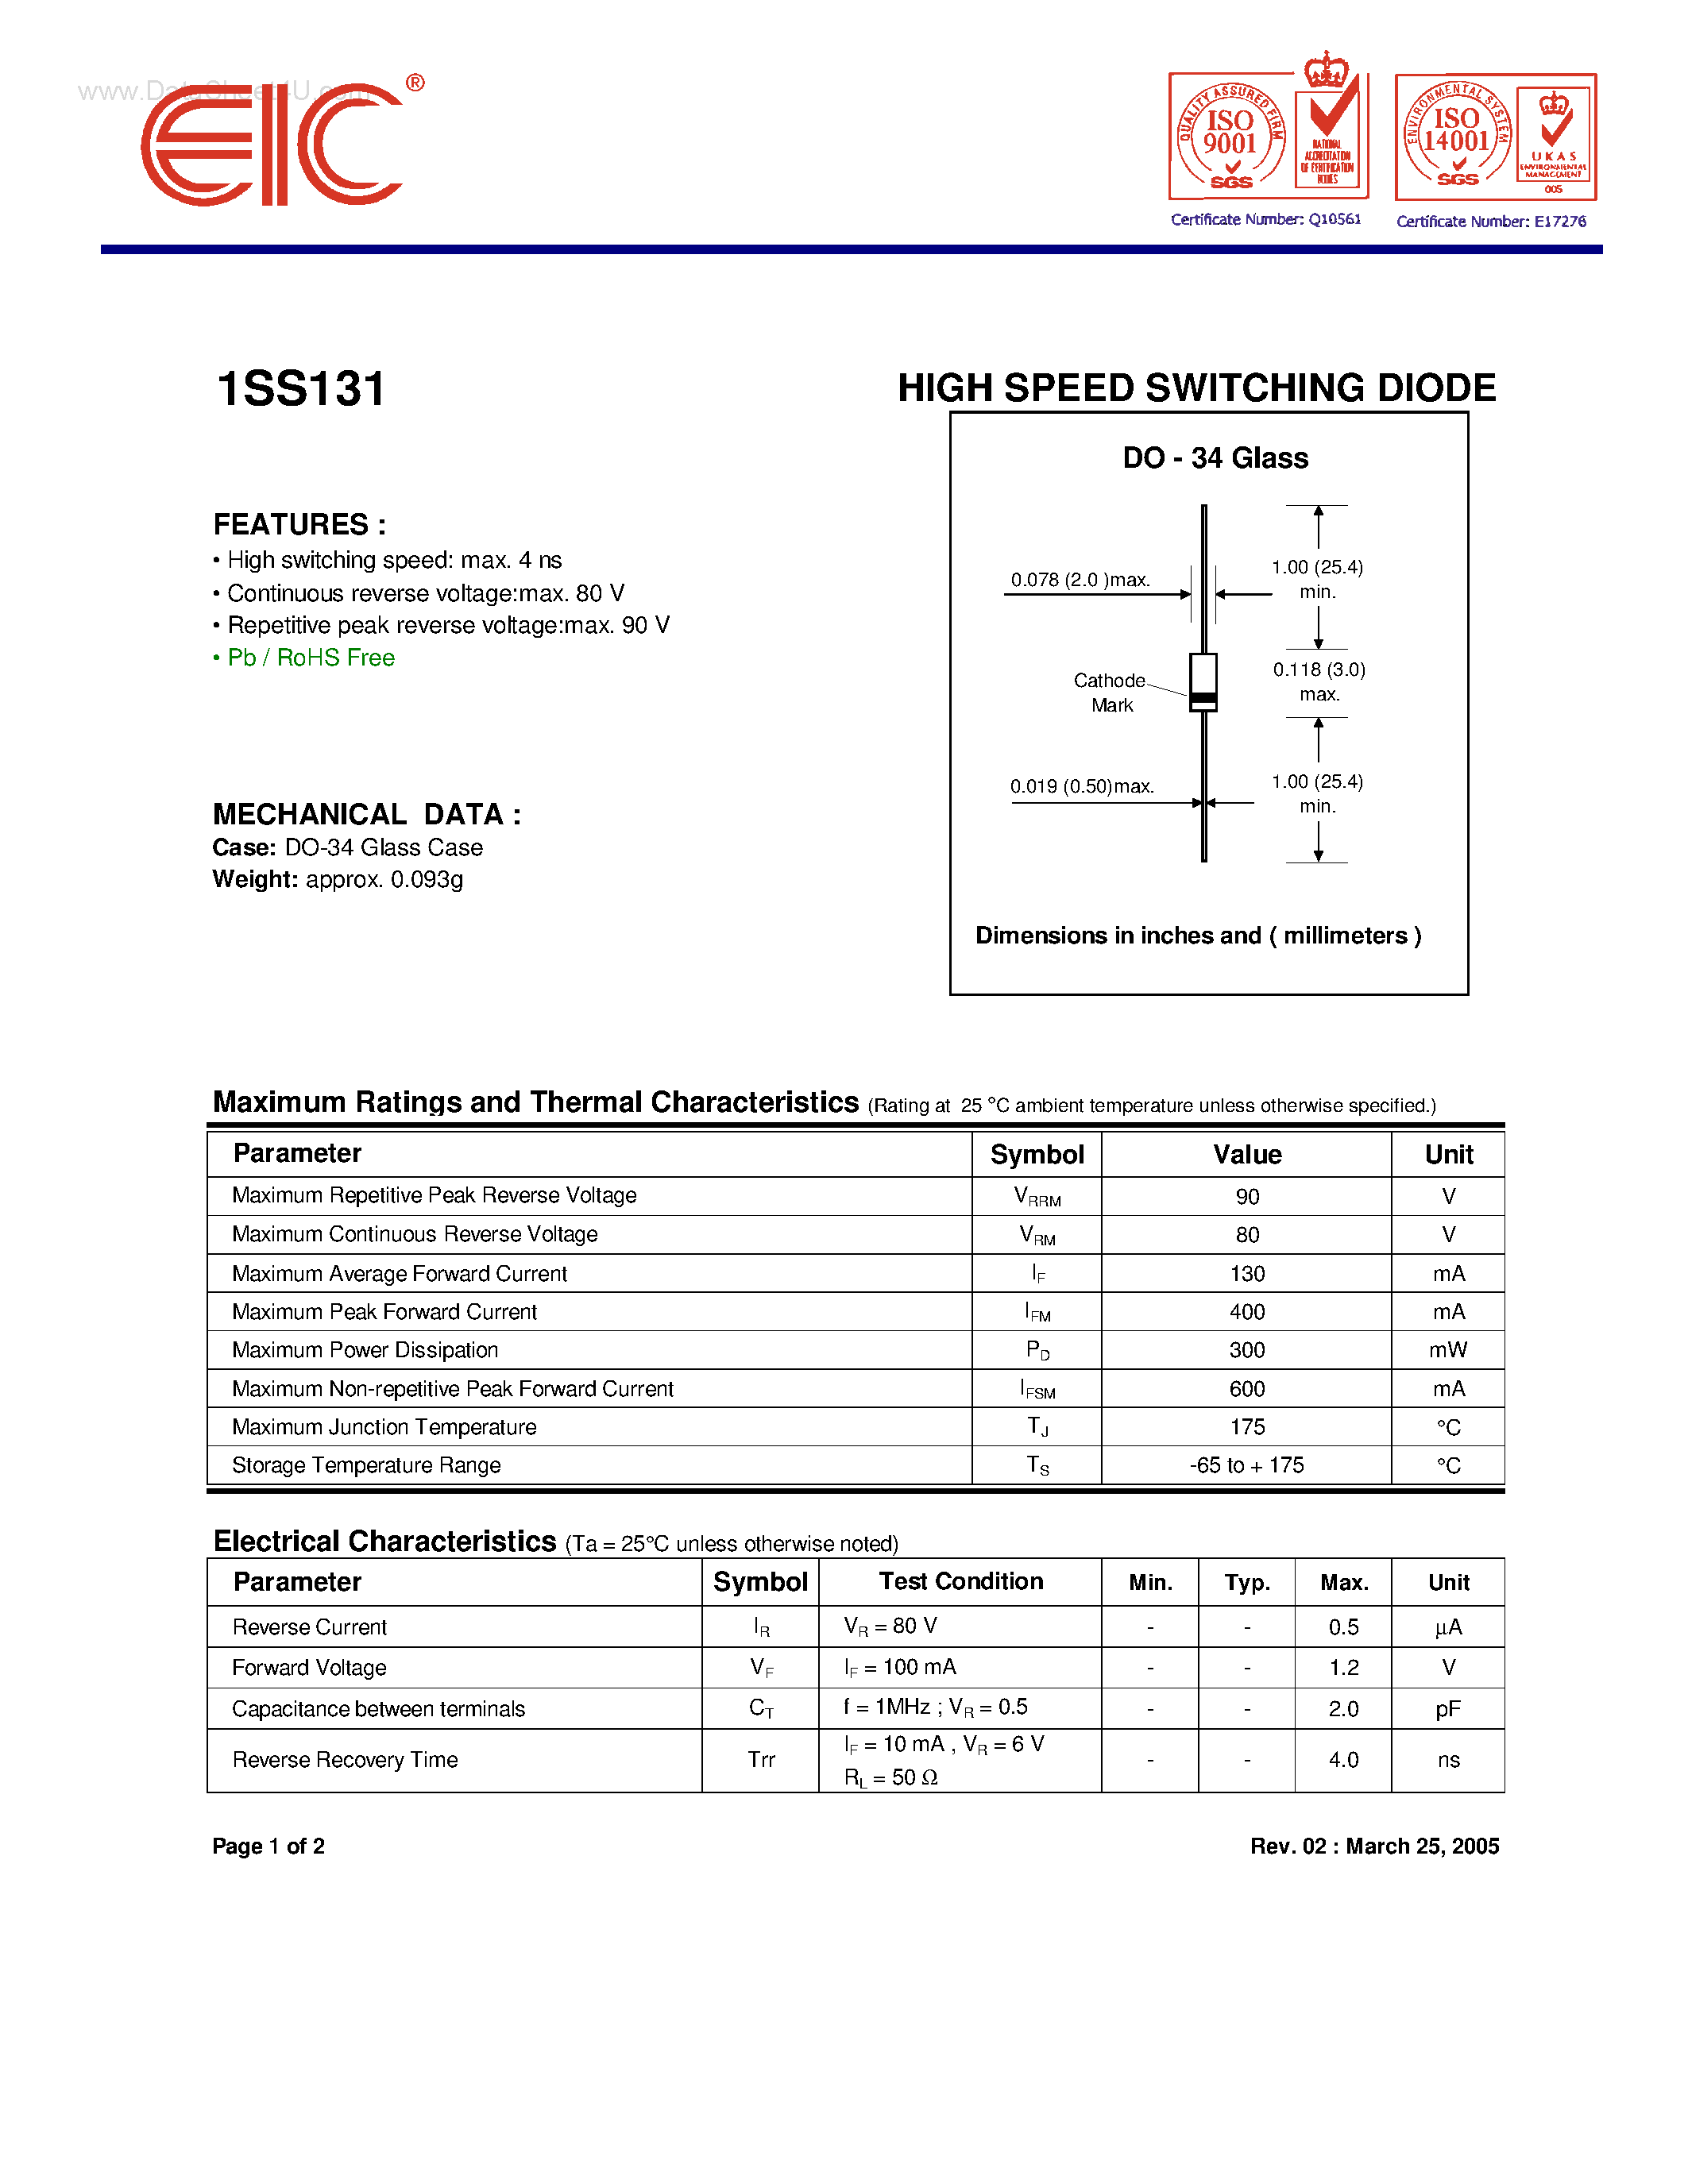 Datasheet 1SS131 - HIGH SPEED SWITCHING DIODE page 1